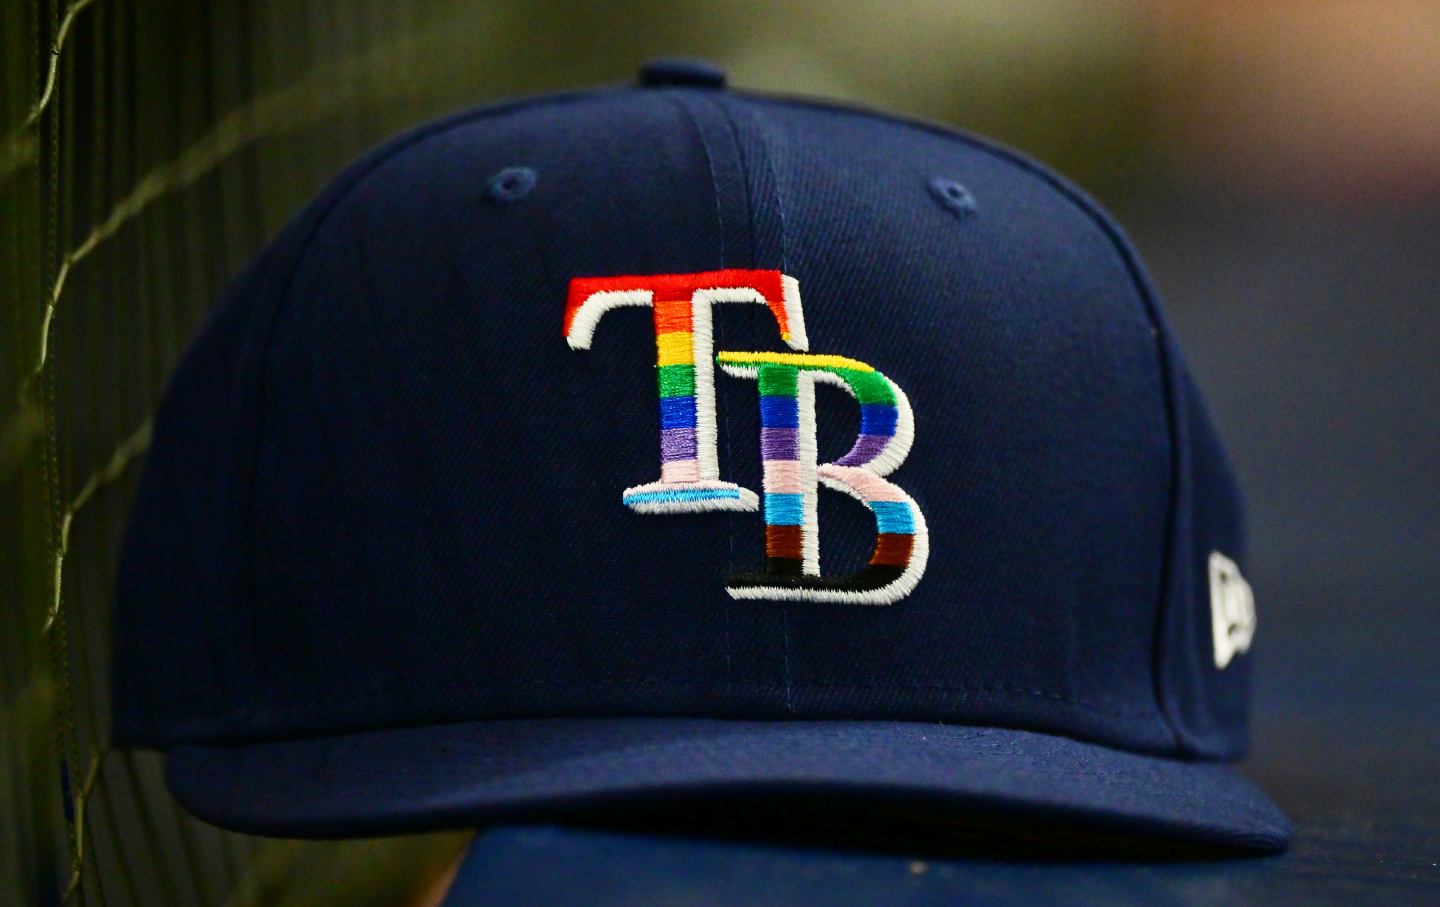 MLB Tampa Bay Rays Players Opt Out of Pride Jerseys - Sports Illustrated